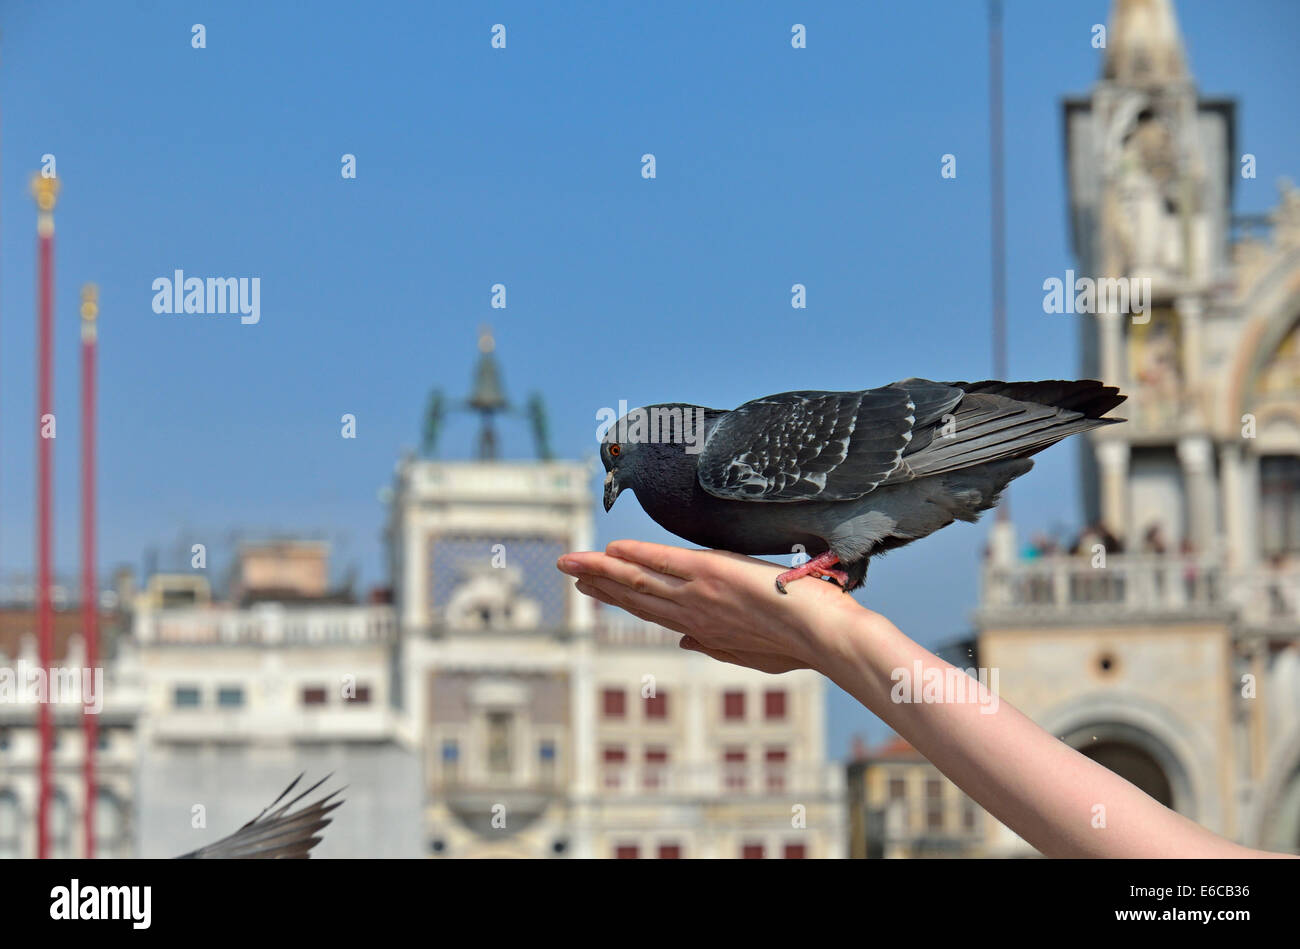 Tourist feeding pigeon in St Mark's Square / Piazza San Marco, Venice, Italy, Europe Stock Photo